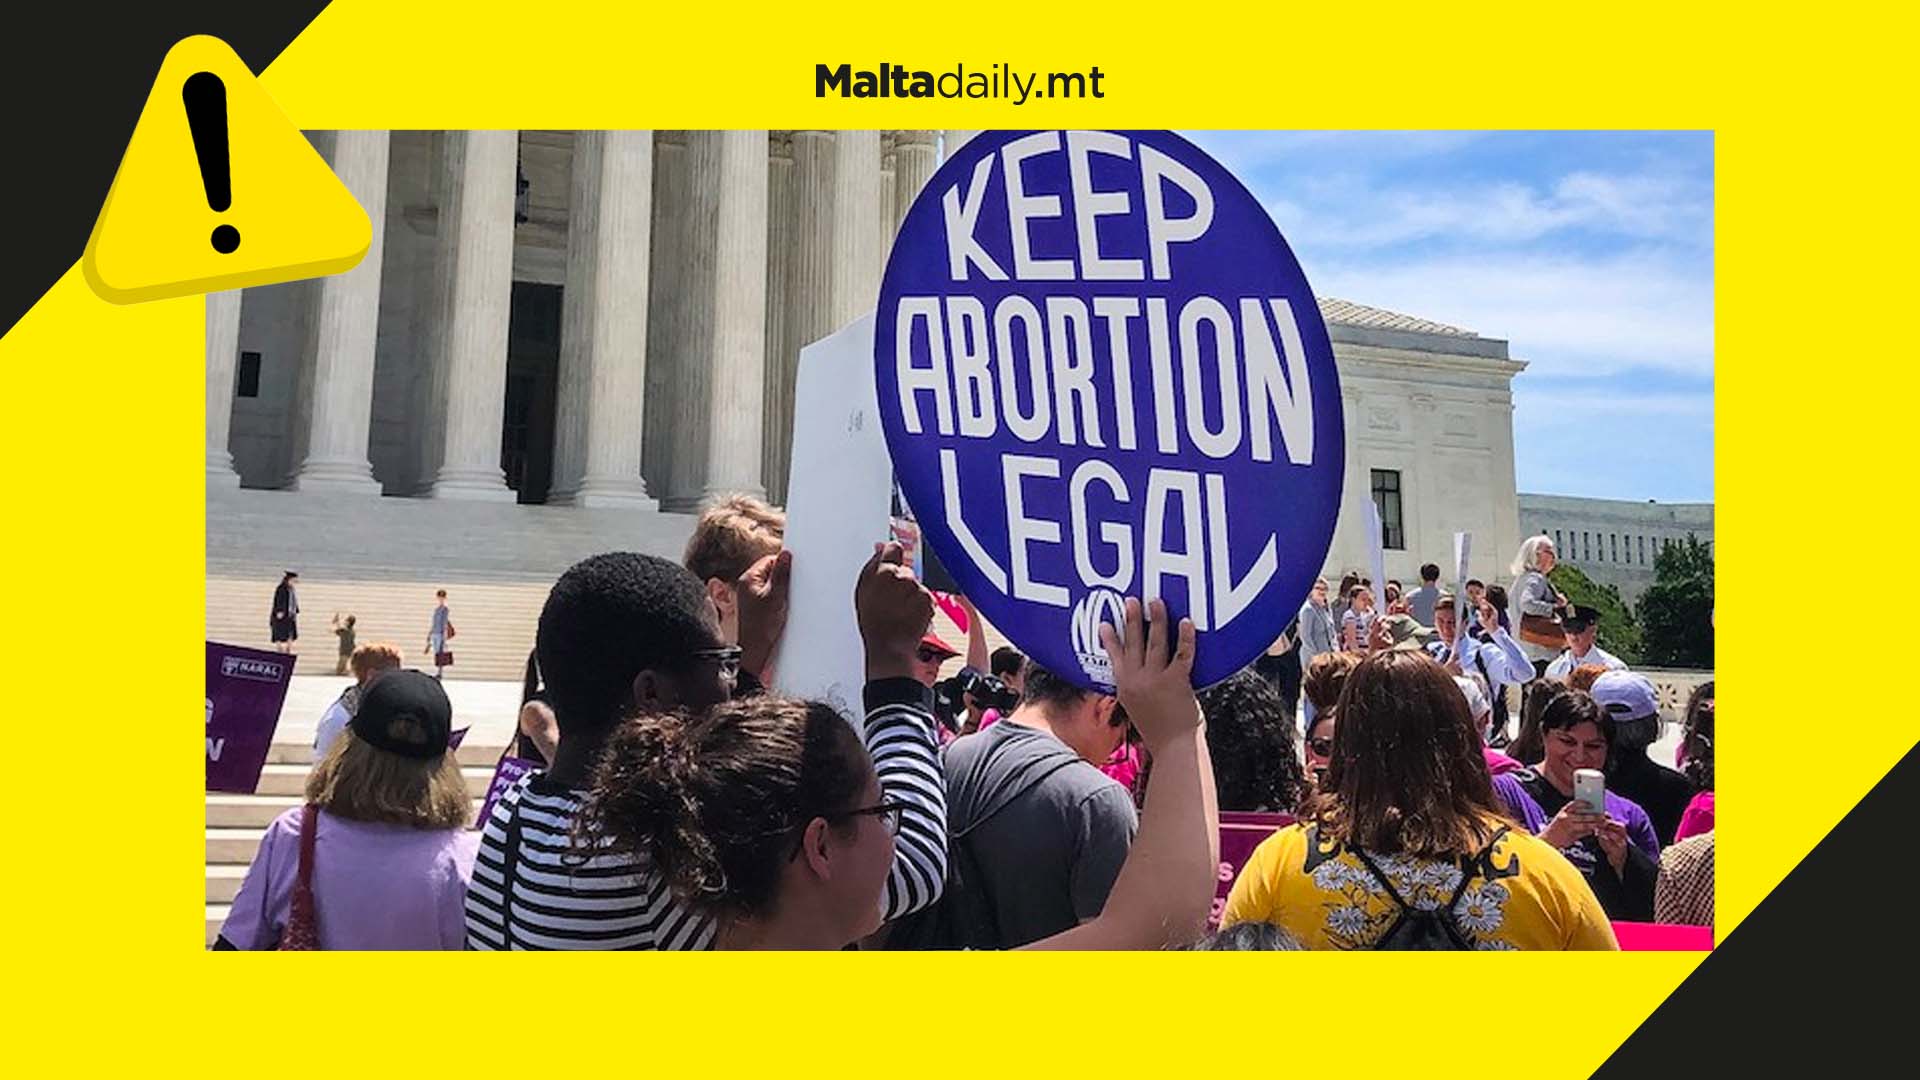 US women loses legal right to abortion as Supreme Court overturns 50 year ruling